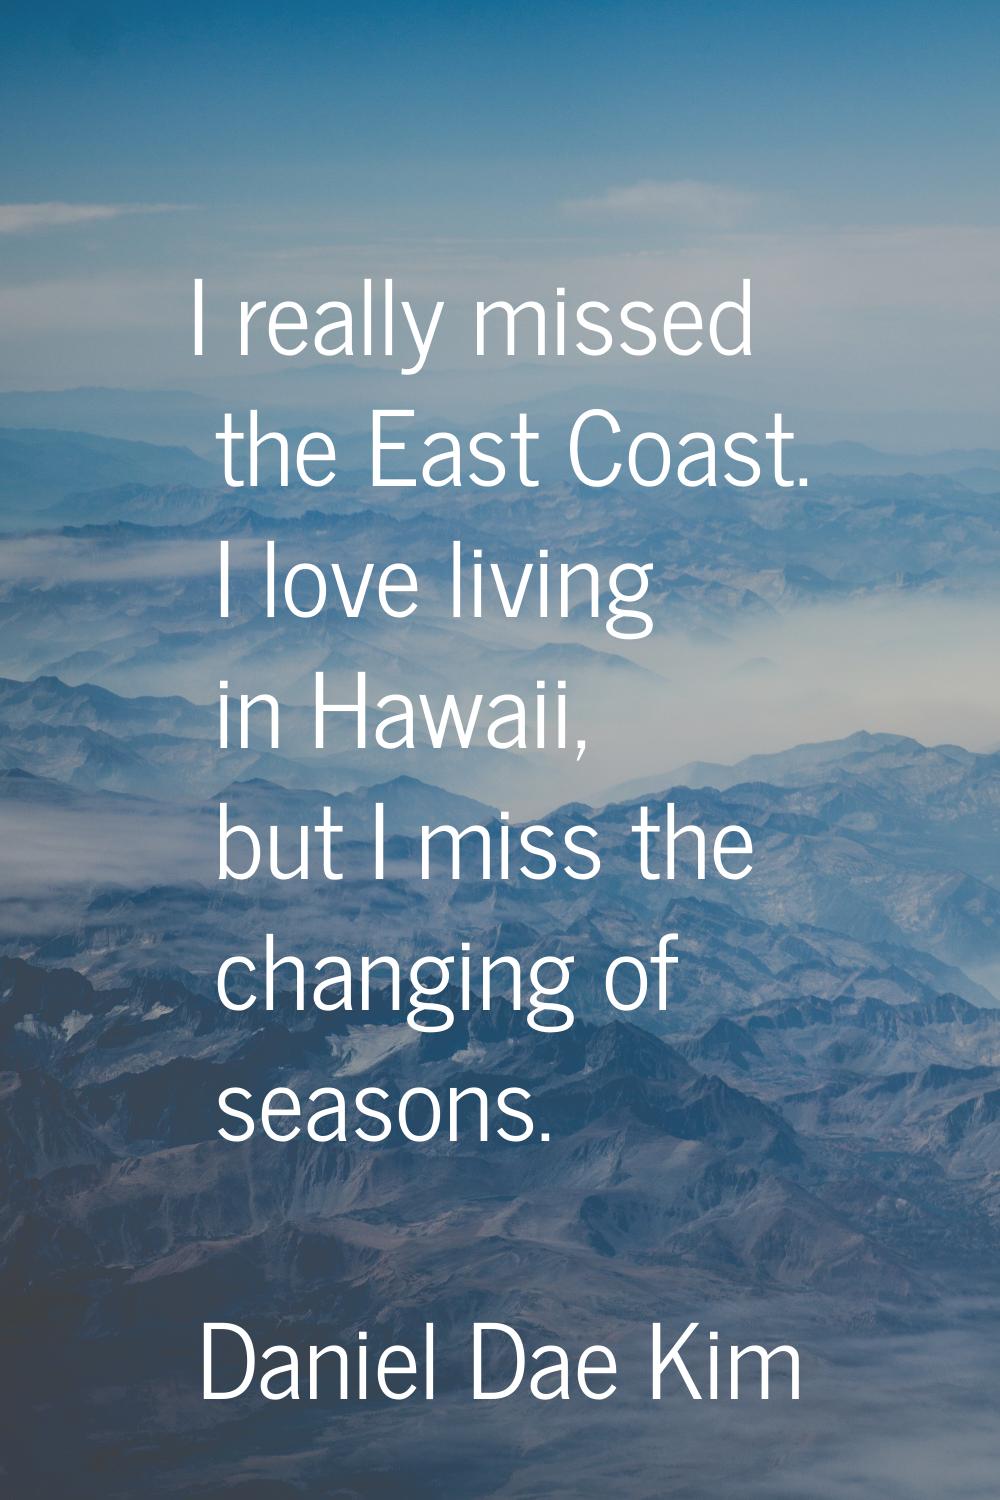 I really missed the East Coast. I love living in Hawaii, but I miss the changing of seasons.